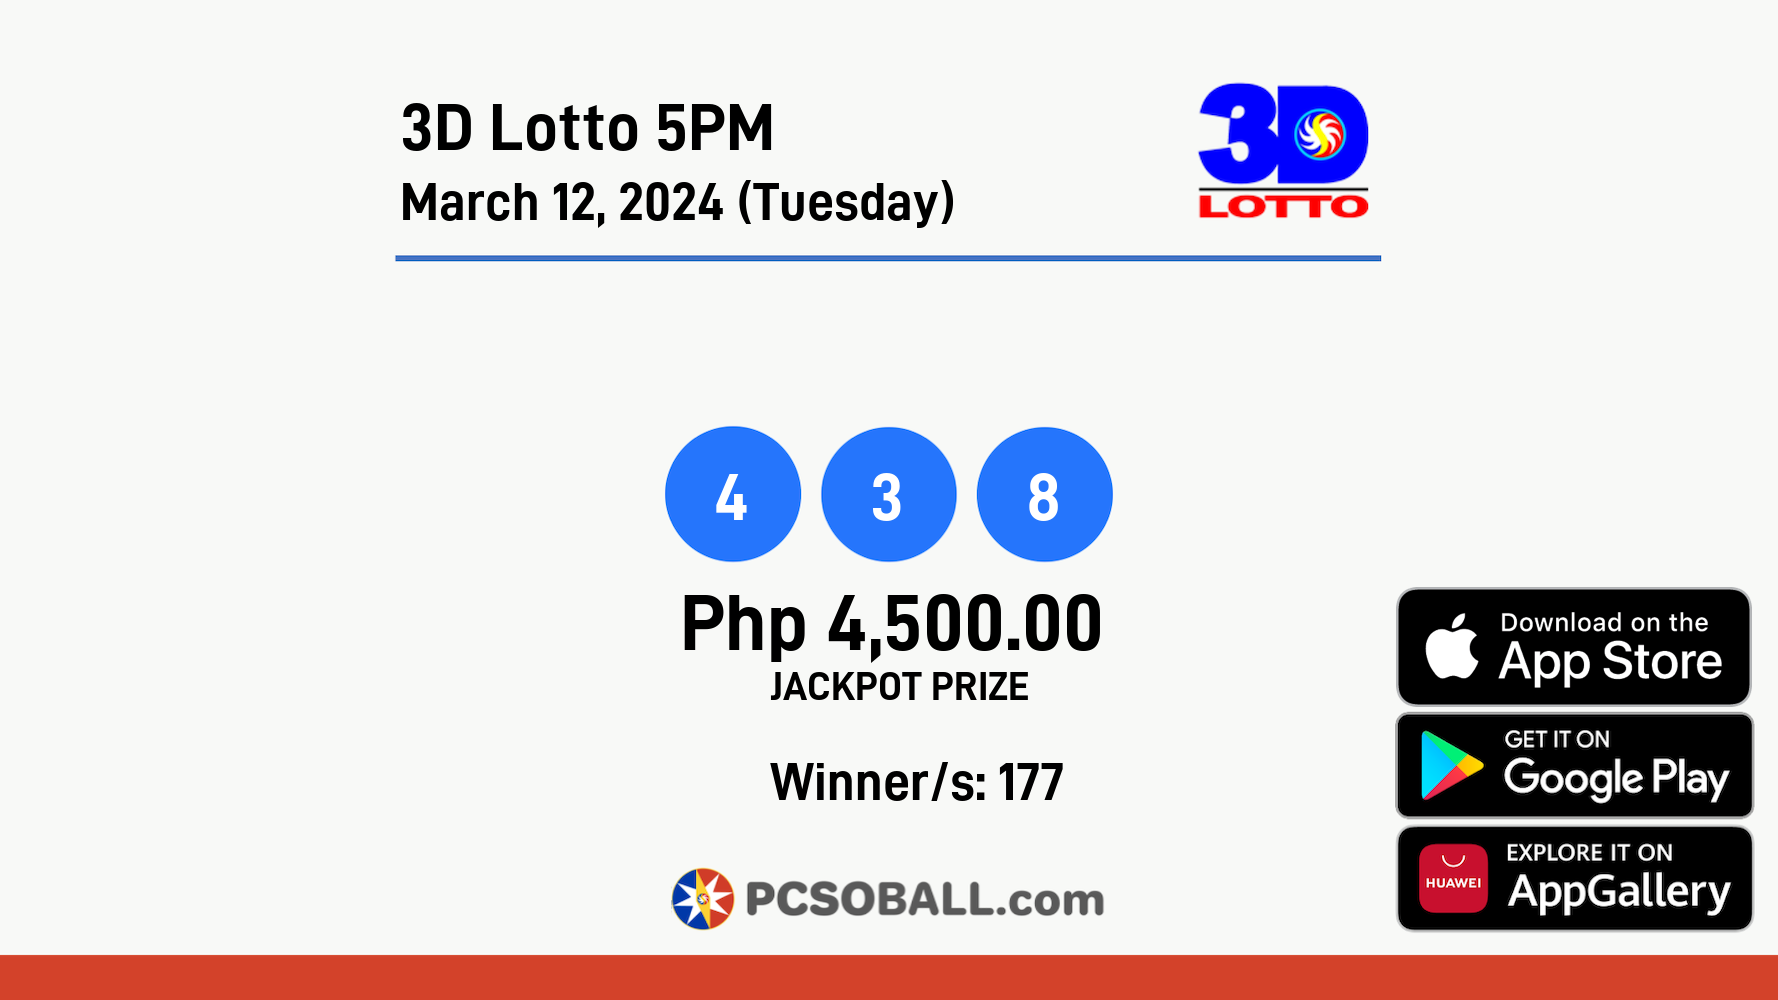 3D Lotto 5PM March 12, 2024 (Tuesday) Result